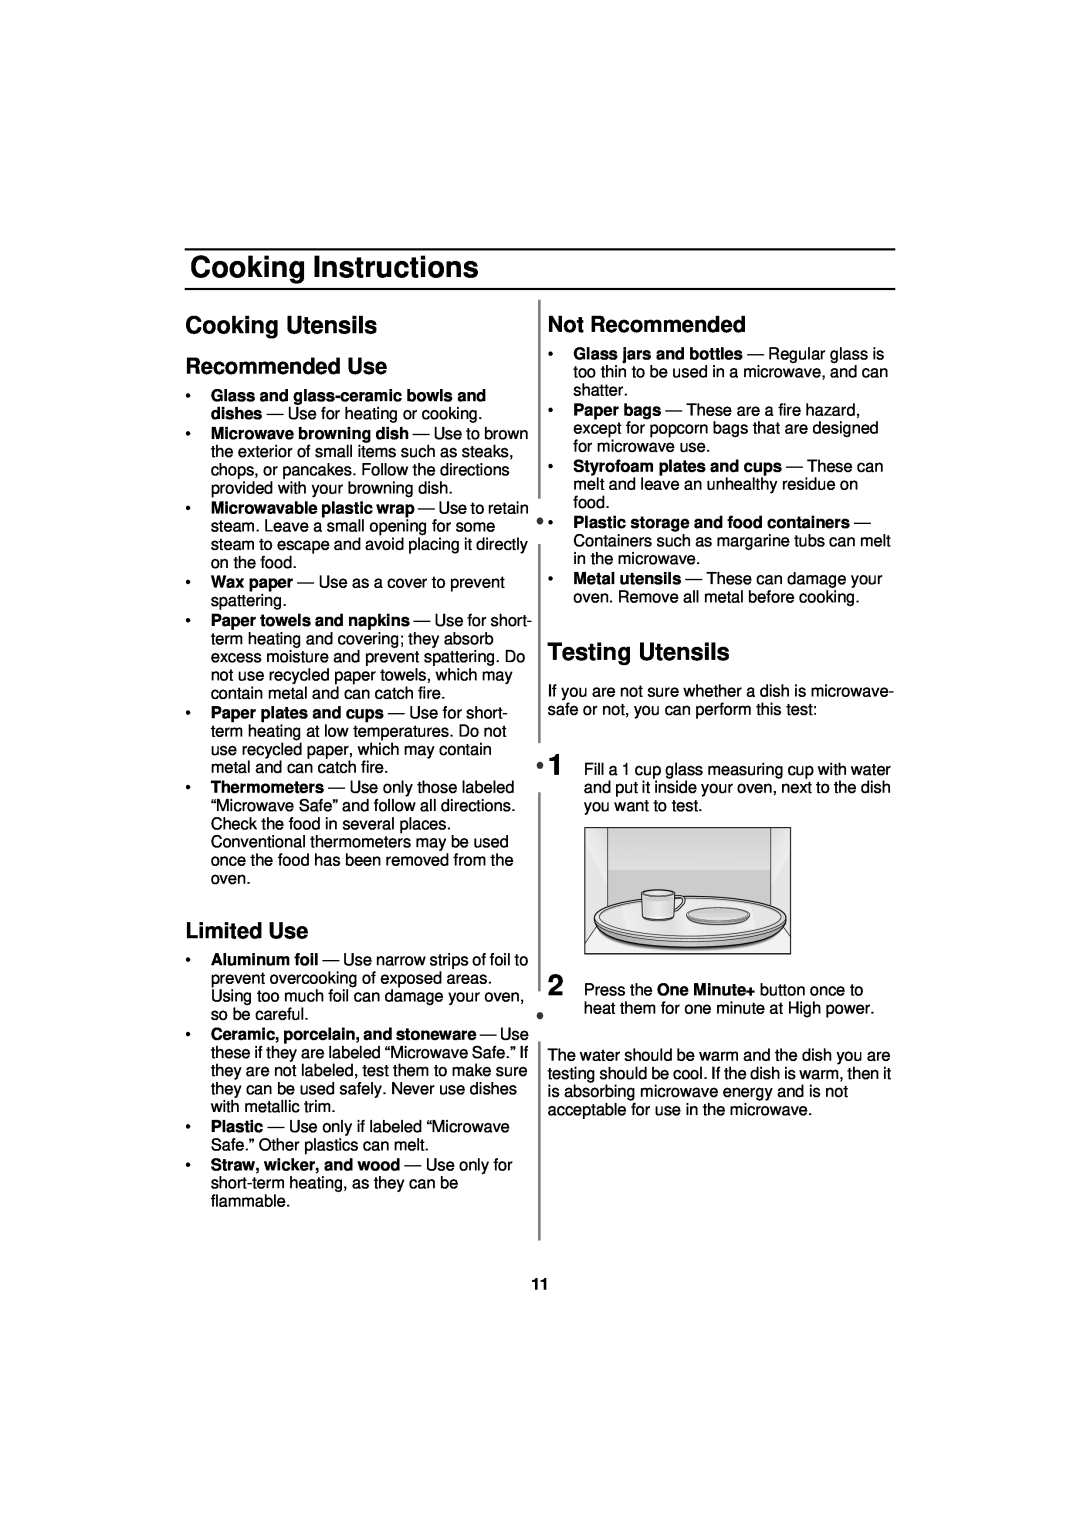 Samsung MW830BA Cooking Instructions, Cooking Utensils, Testing Utensils, Not Recommended, Recommended Use, Limited Use 